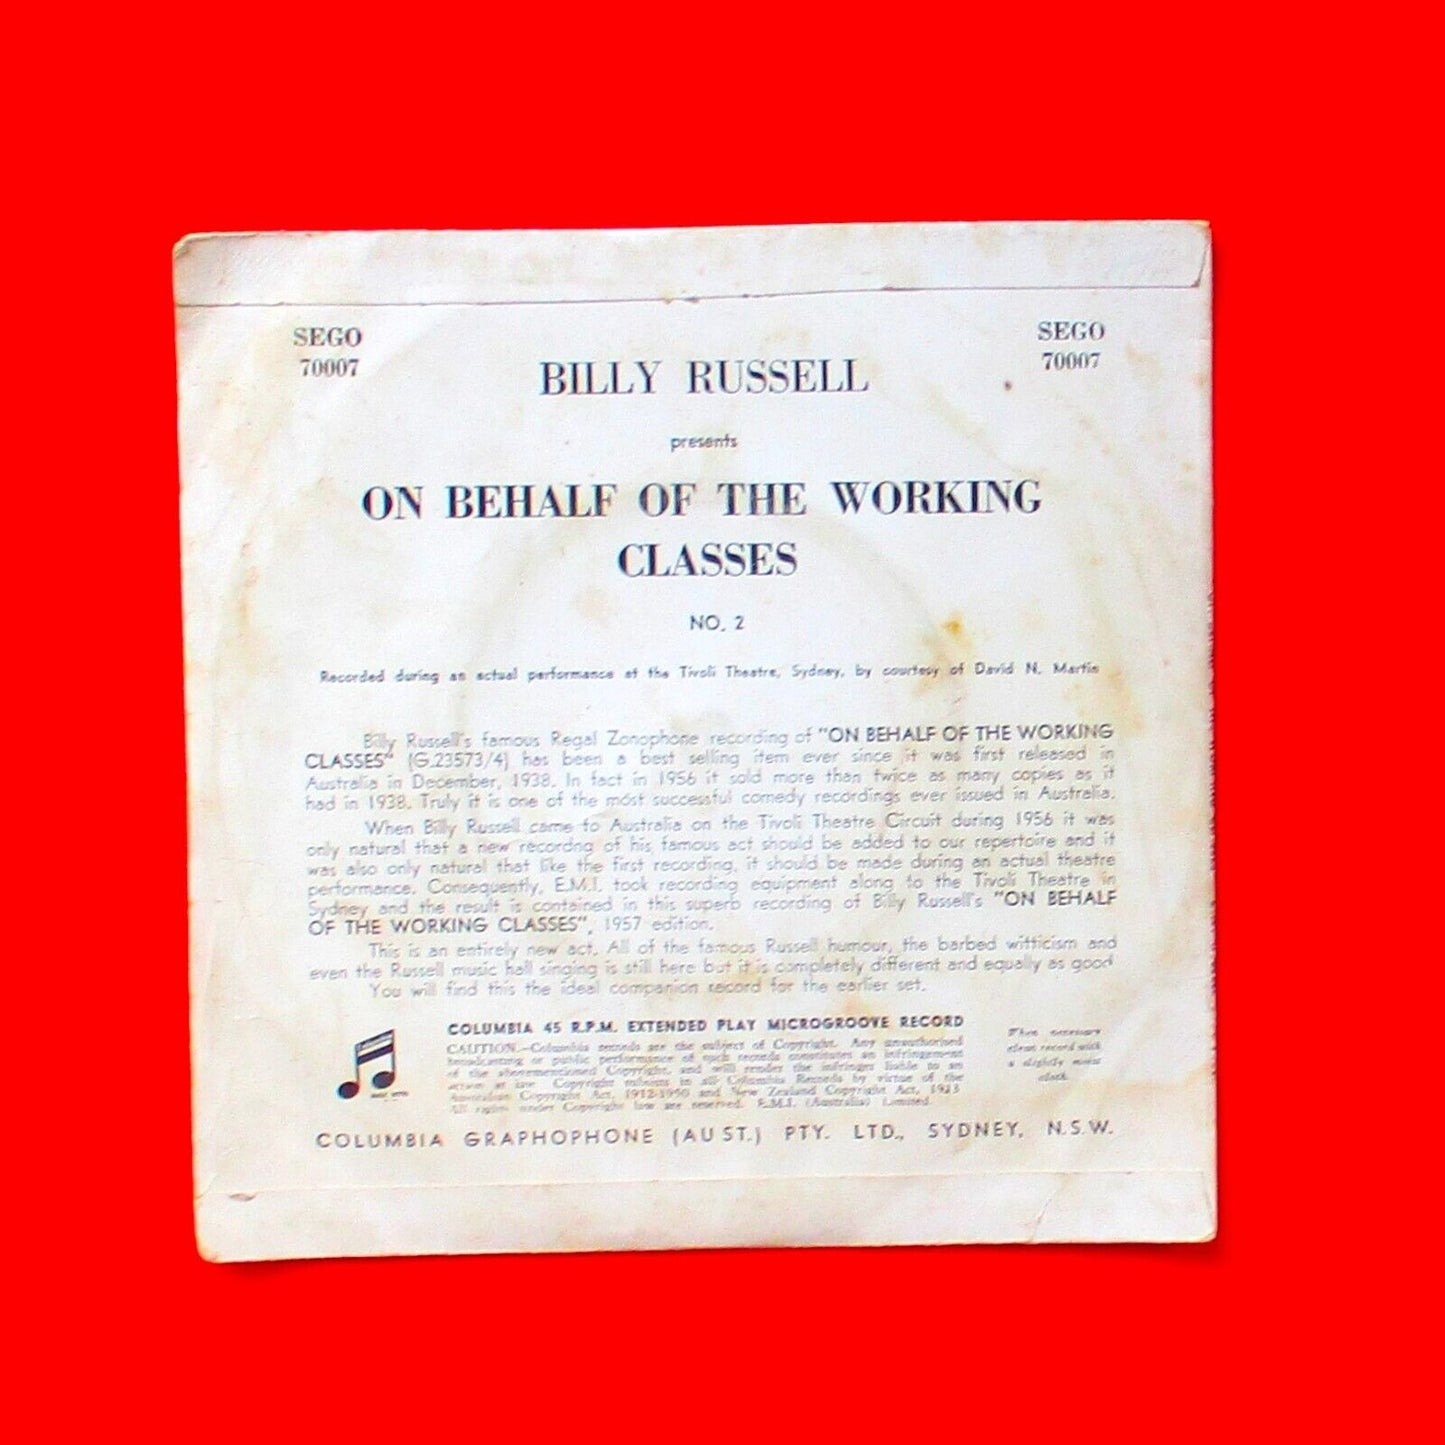 Billy Russell On Behalf Of The Working Classes No. 2 Vinyl EP 7" 1957 Australian